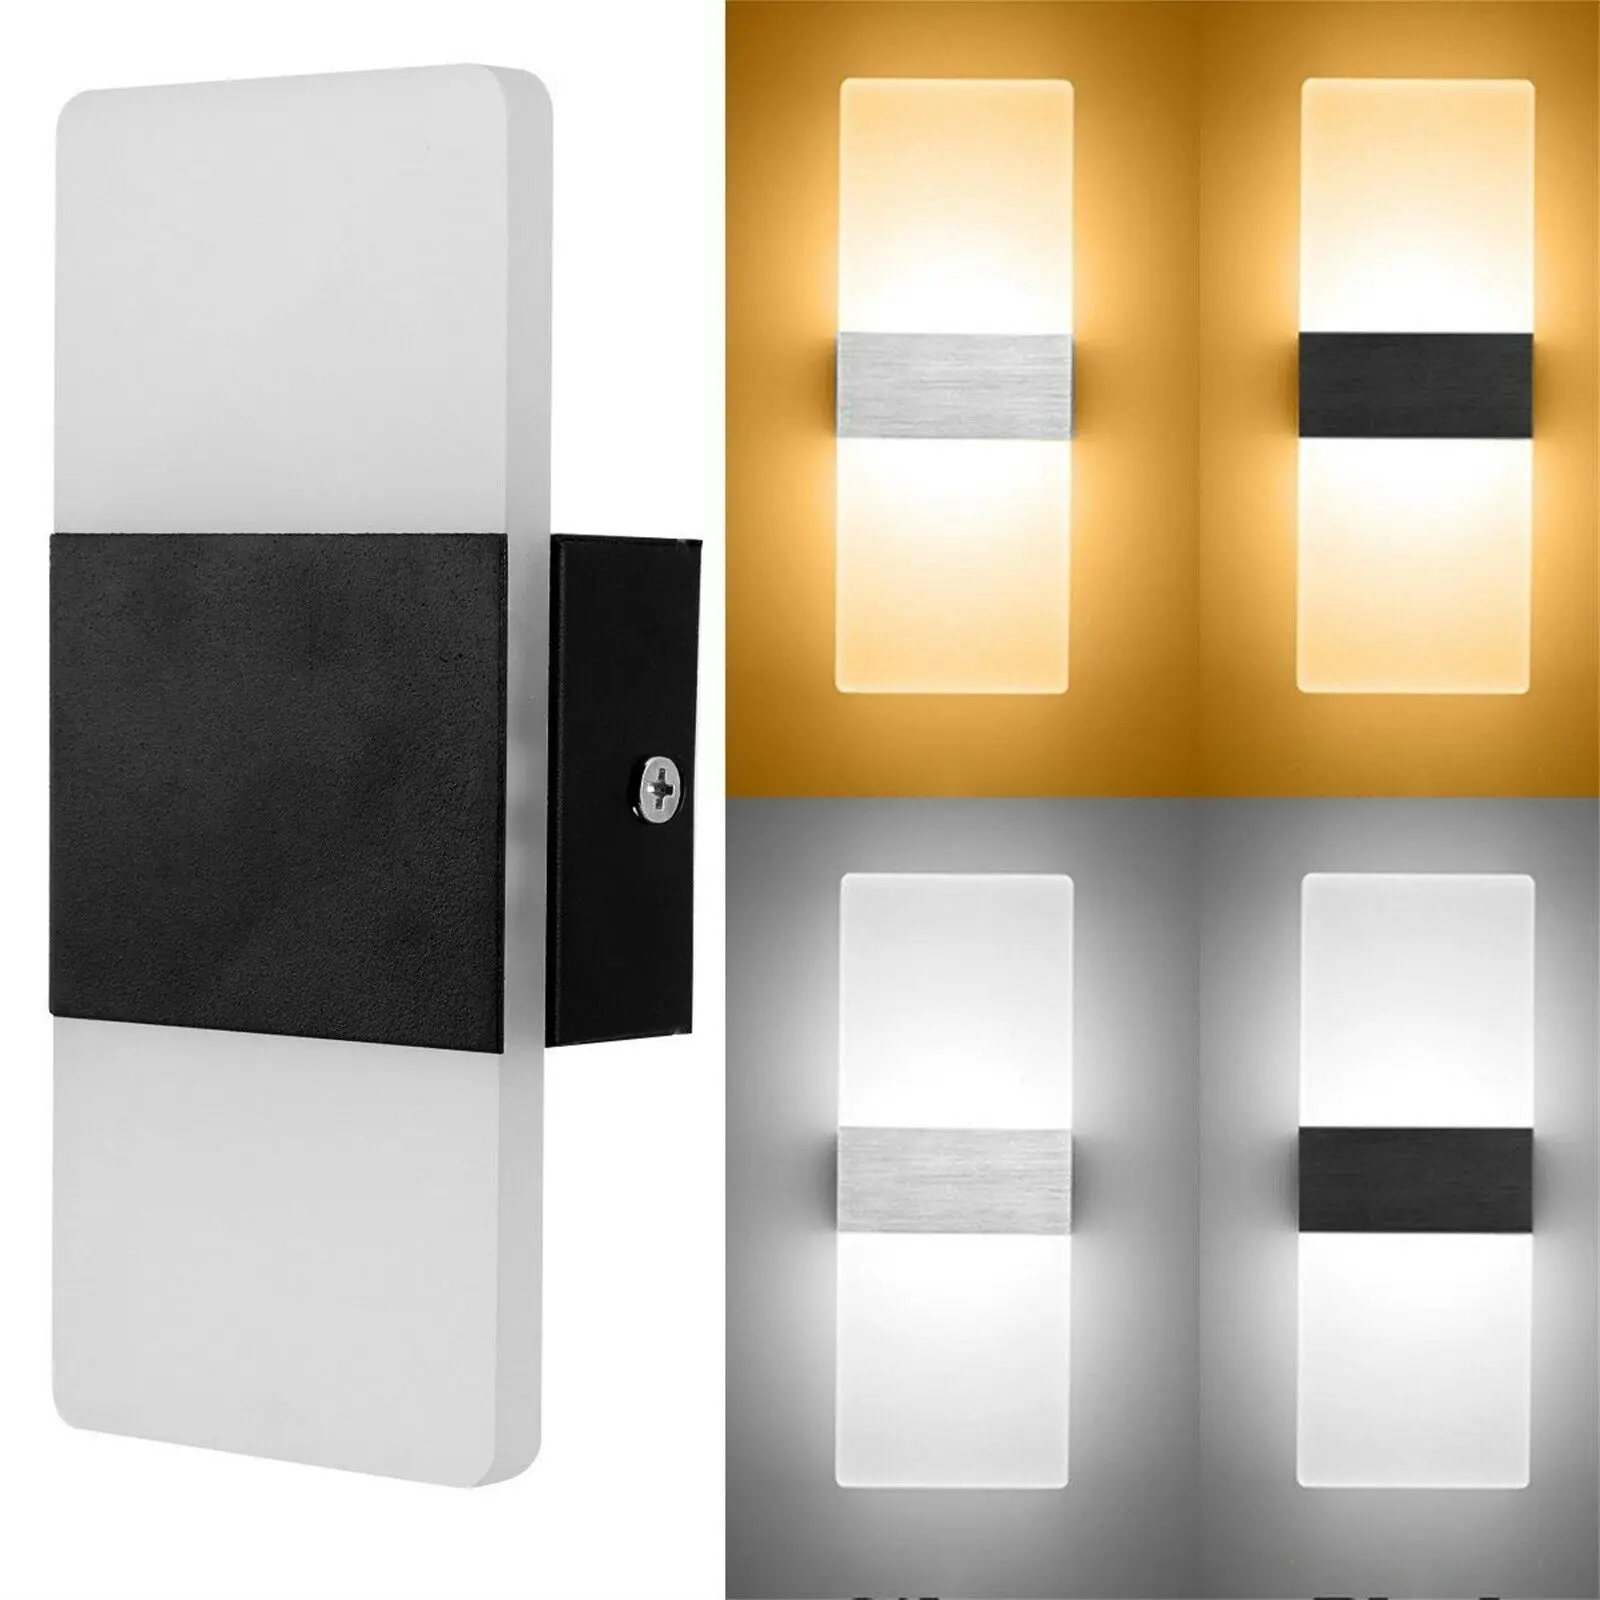 LED Wall Light Up Down Cube Indoor Outdoor Sconce Lighting Lamp Fixture Decor 